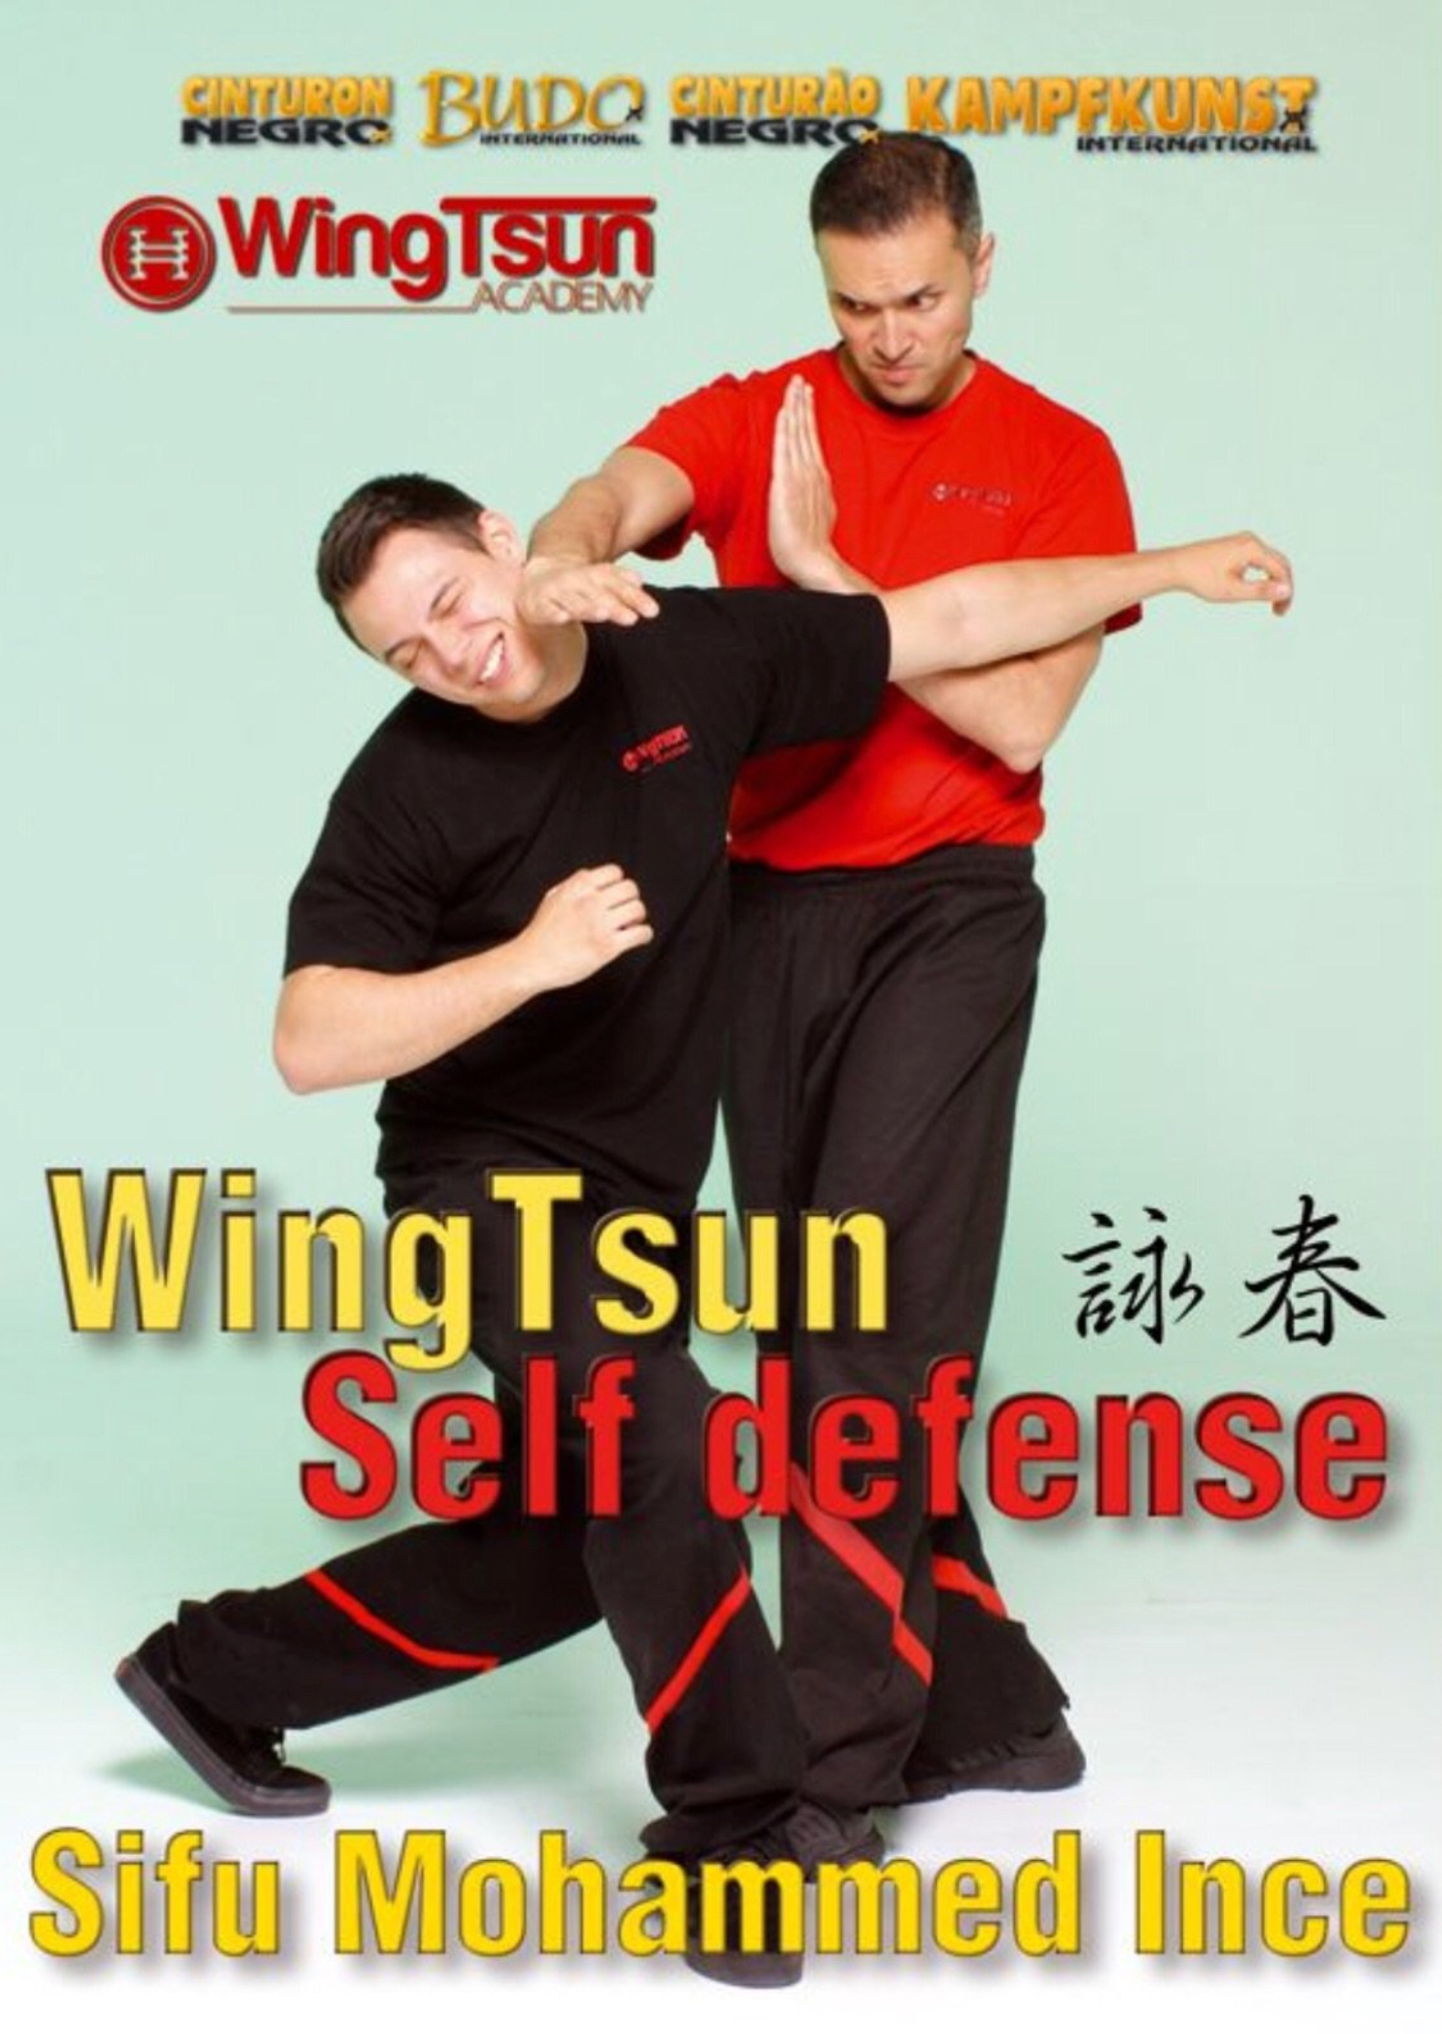 Wing Tsun Self Defense DVD with Mohammed Ince - Budovideos Inc